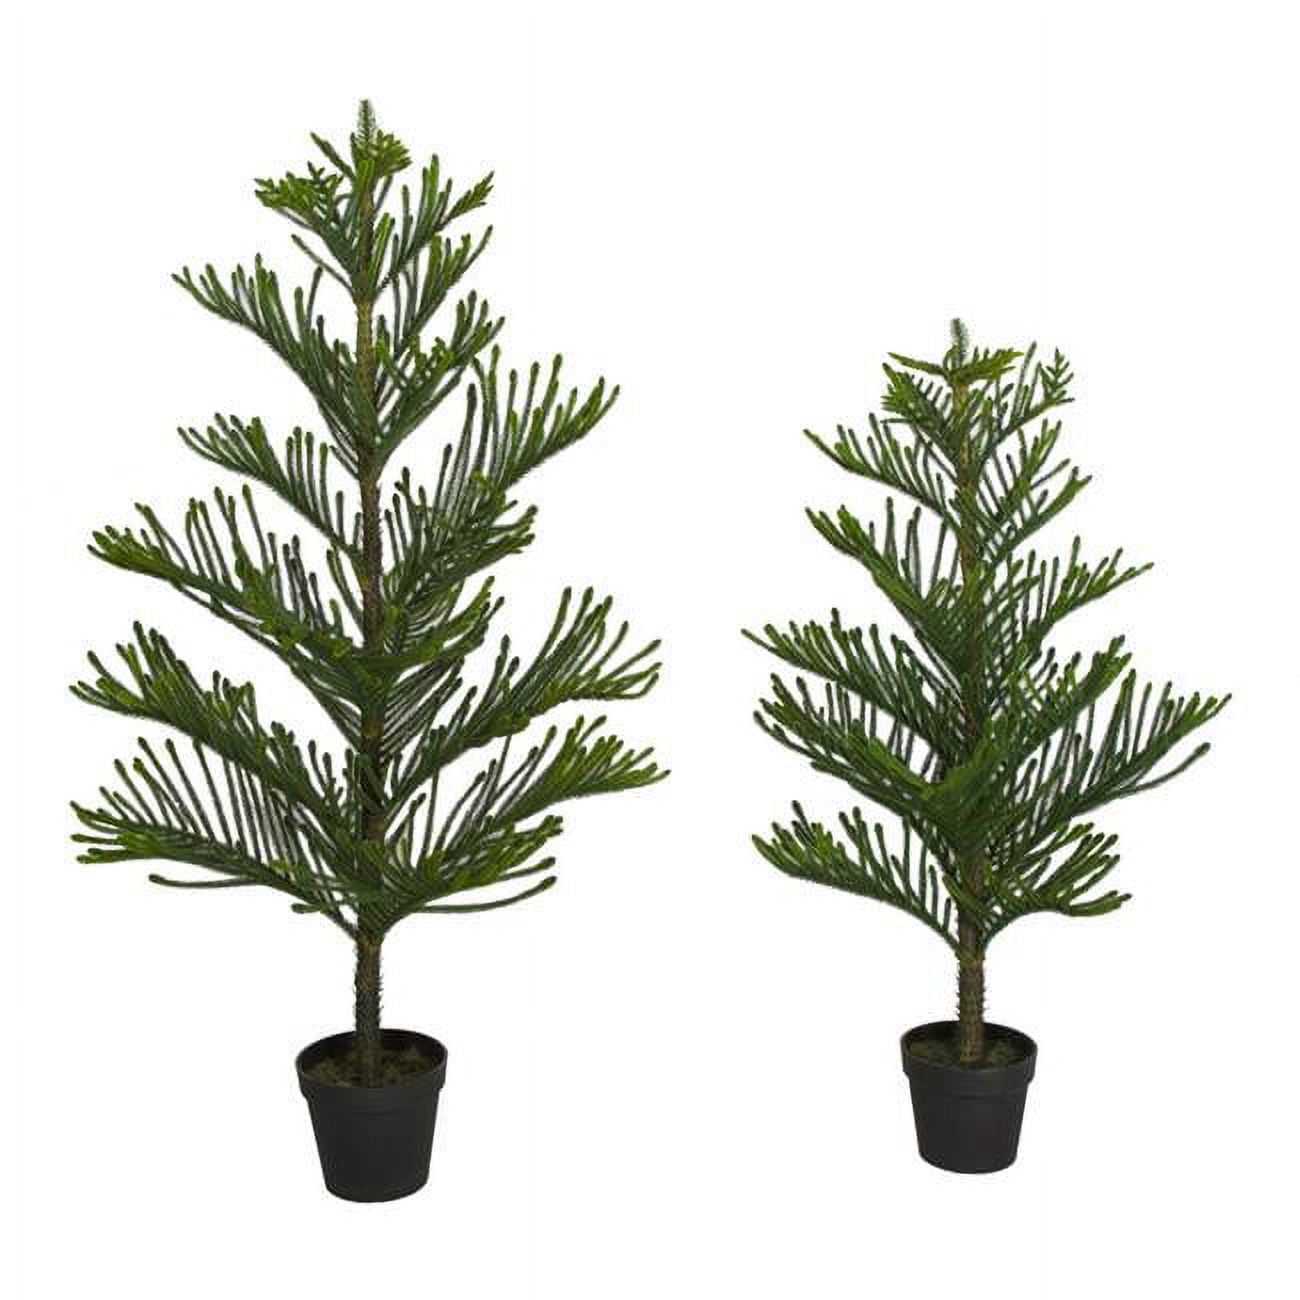 wirlsweal Fake Plants Faux Pine Leaves Christmas Artificial Pine